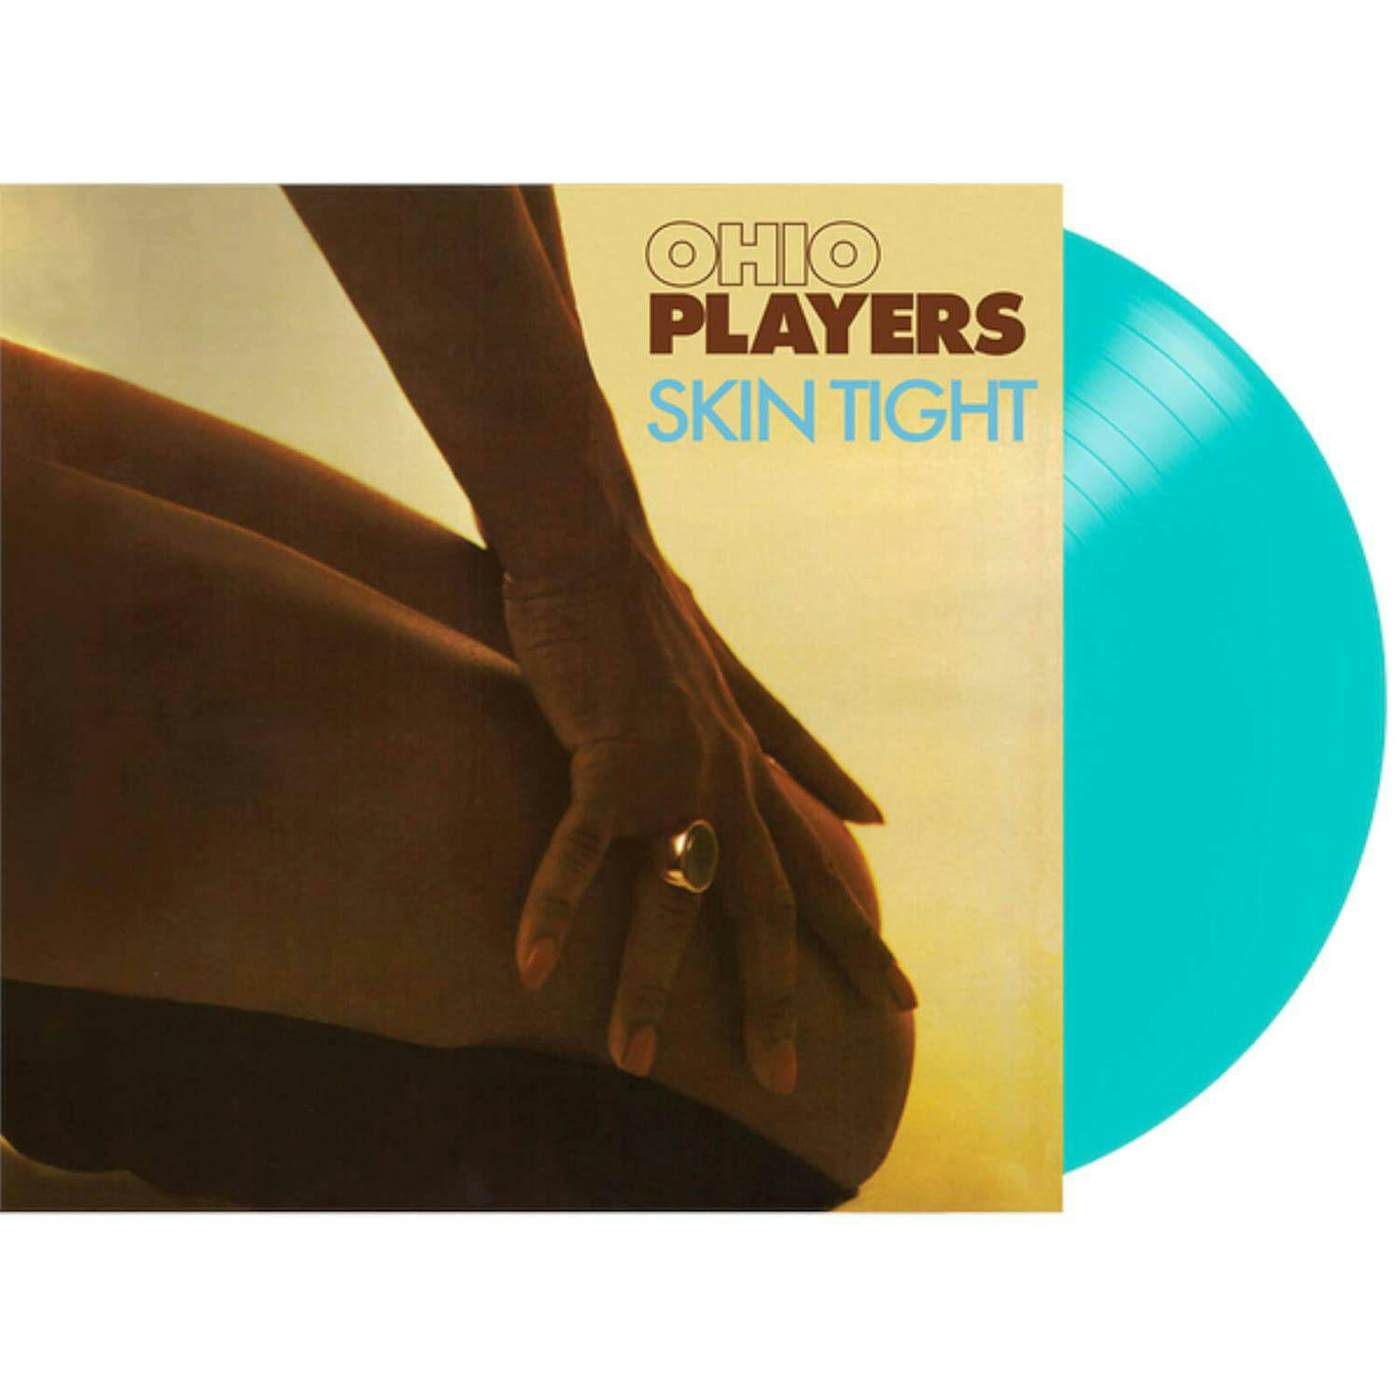 Ohio Players SKIN TIGHT (180G/TURQUOISE VINYL/LIMITED ANNIVERSARY EDITION/GATEFOLD COVER) Vinyl Record